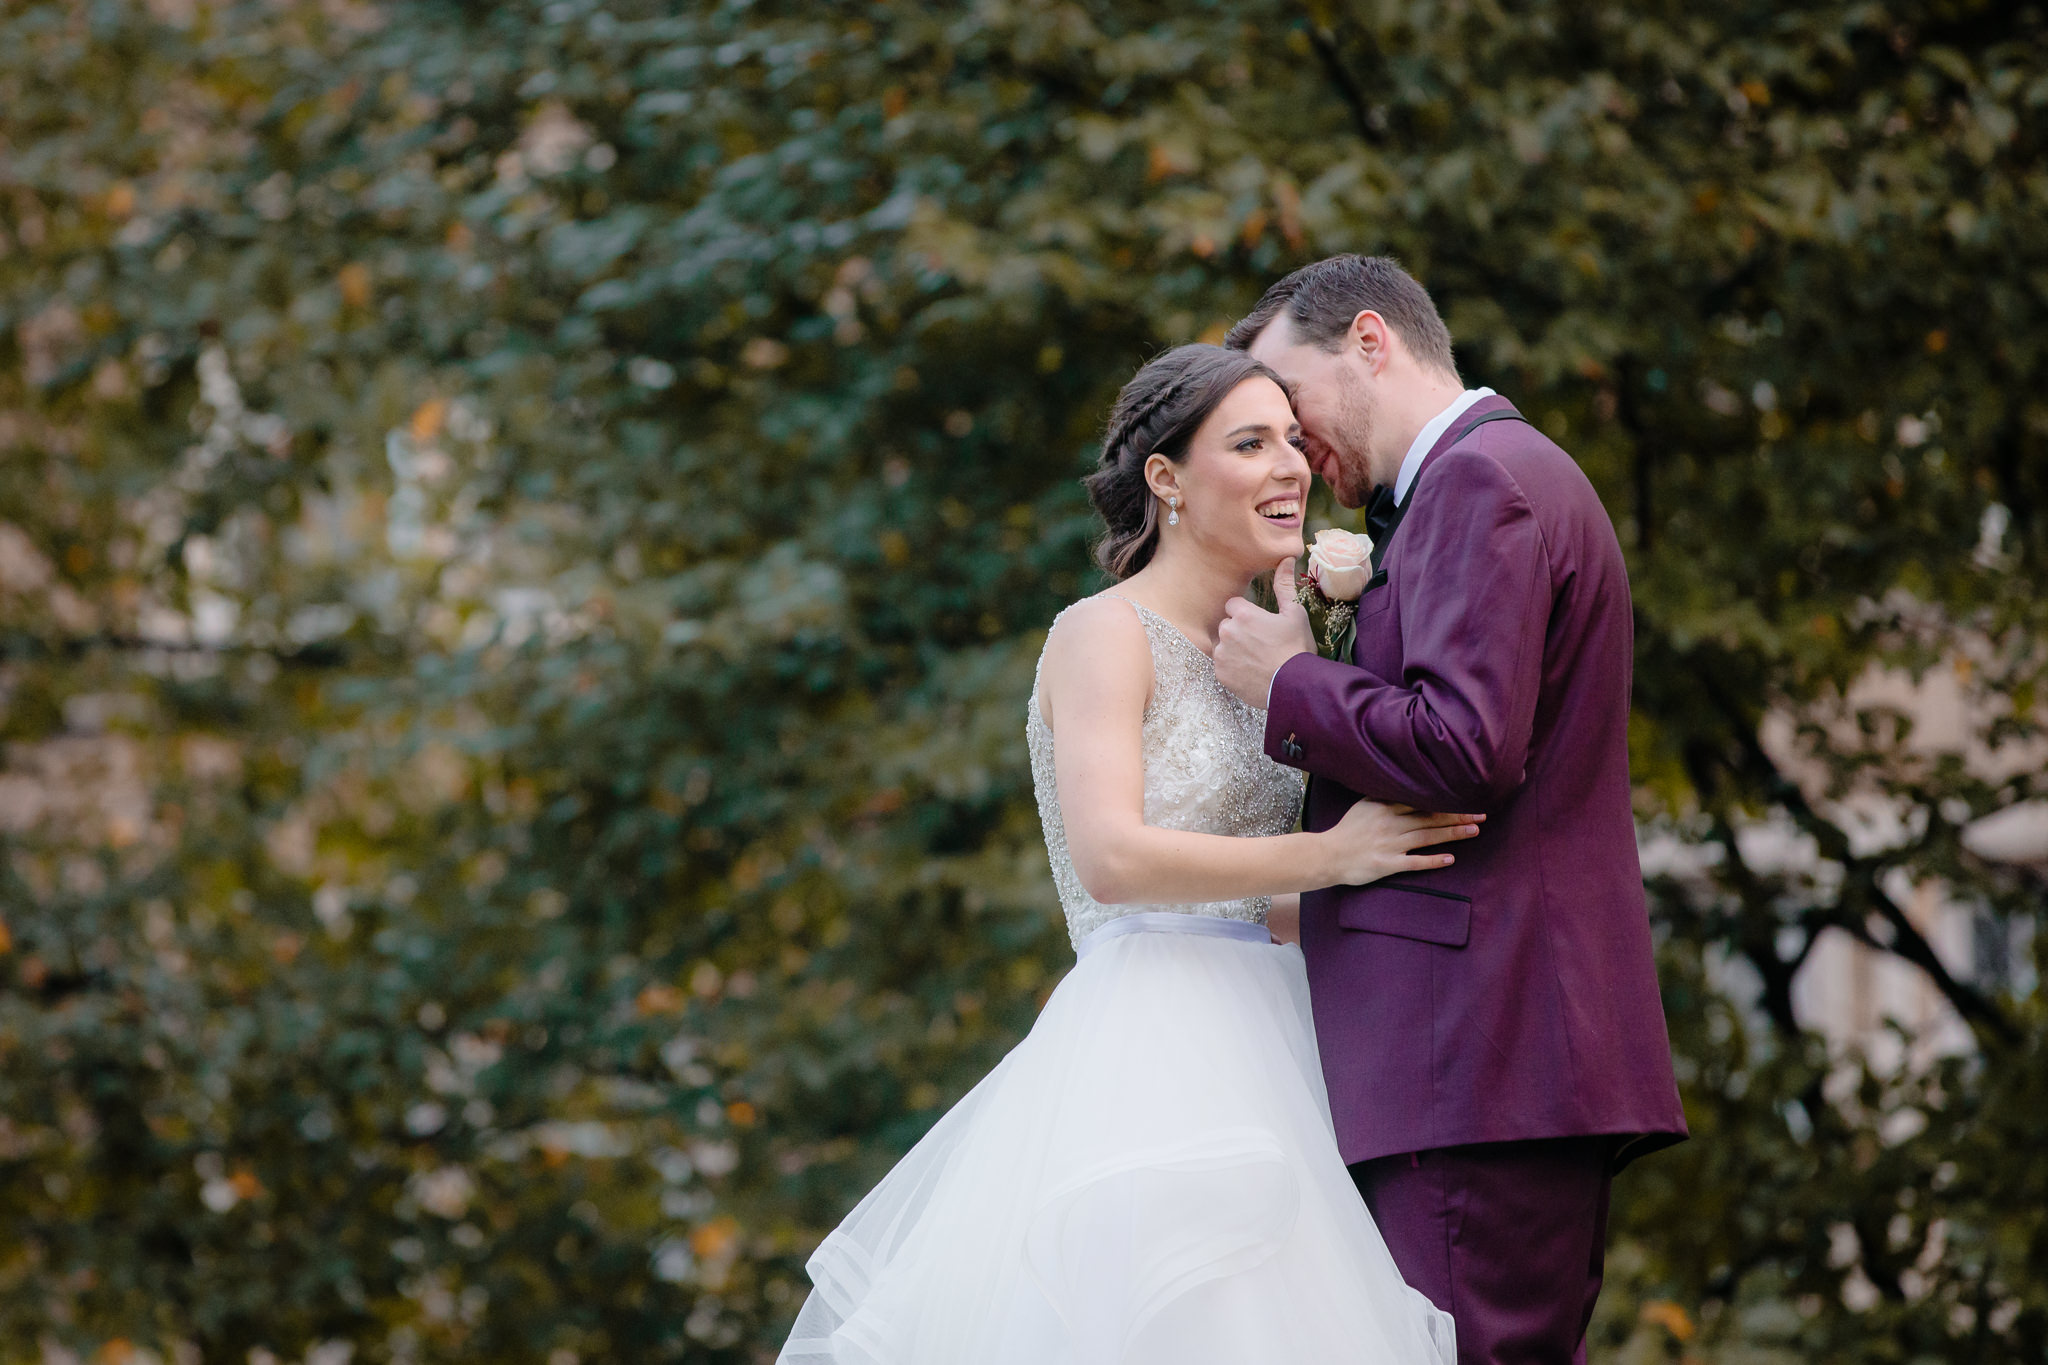 Bride laughs as groom whispers in her ear in Allegheny Commons Park in the North Side